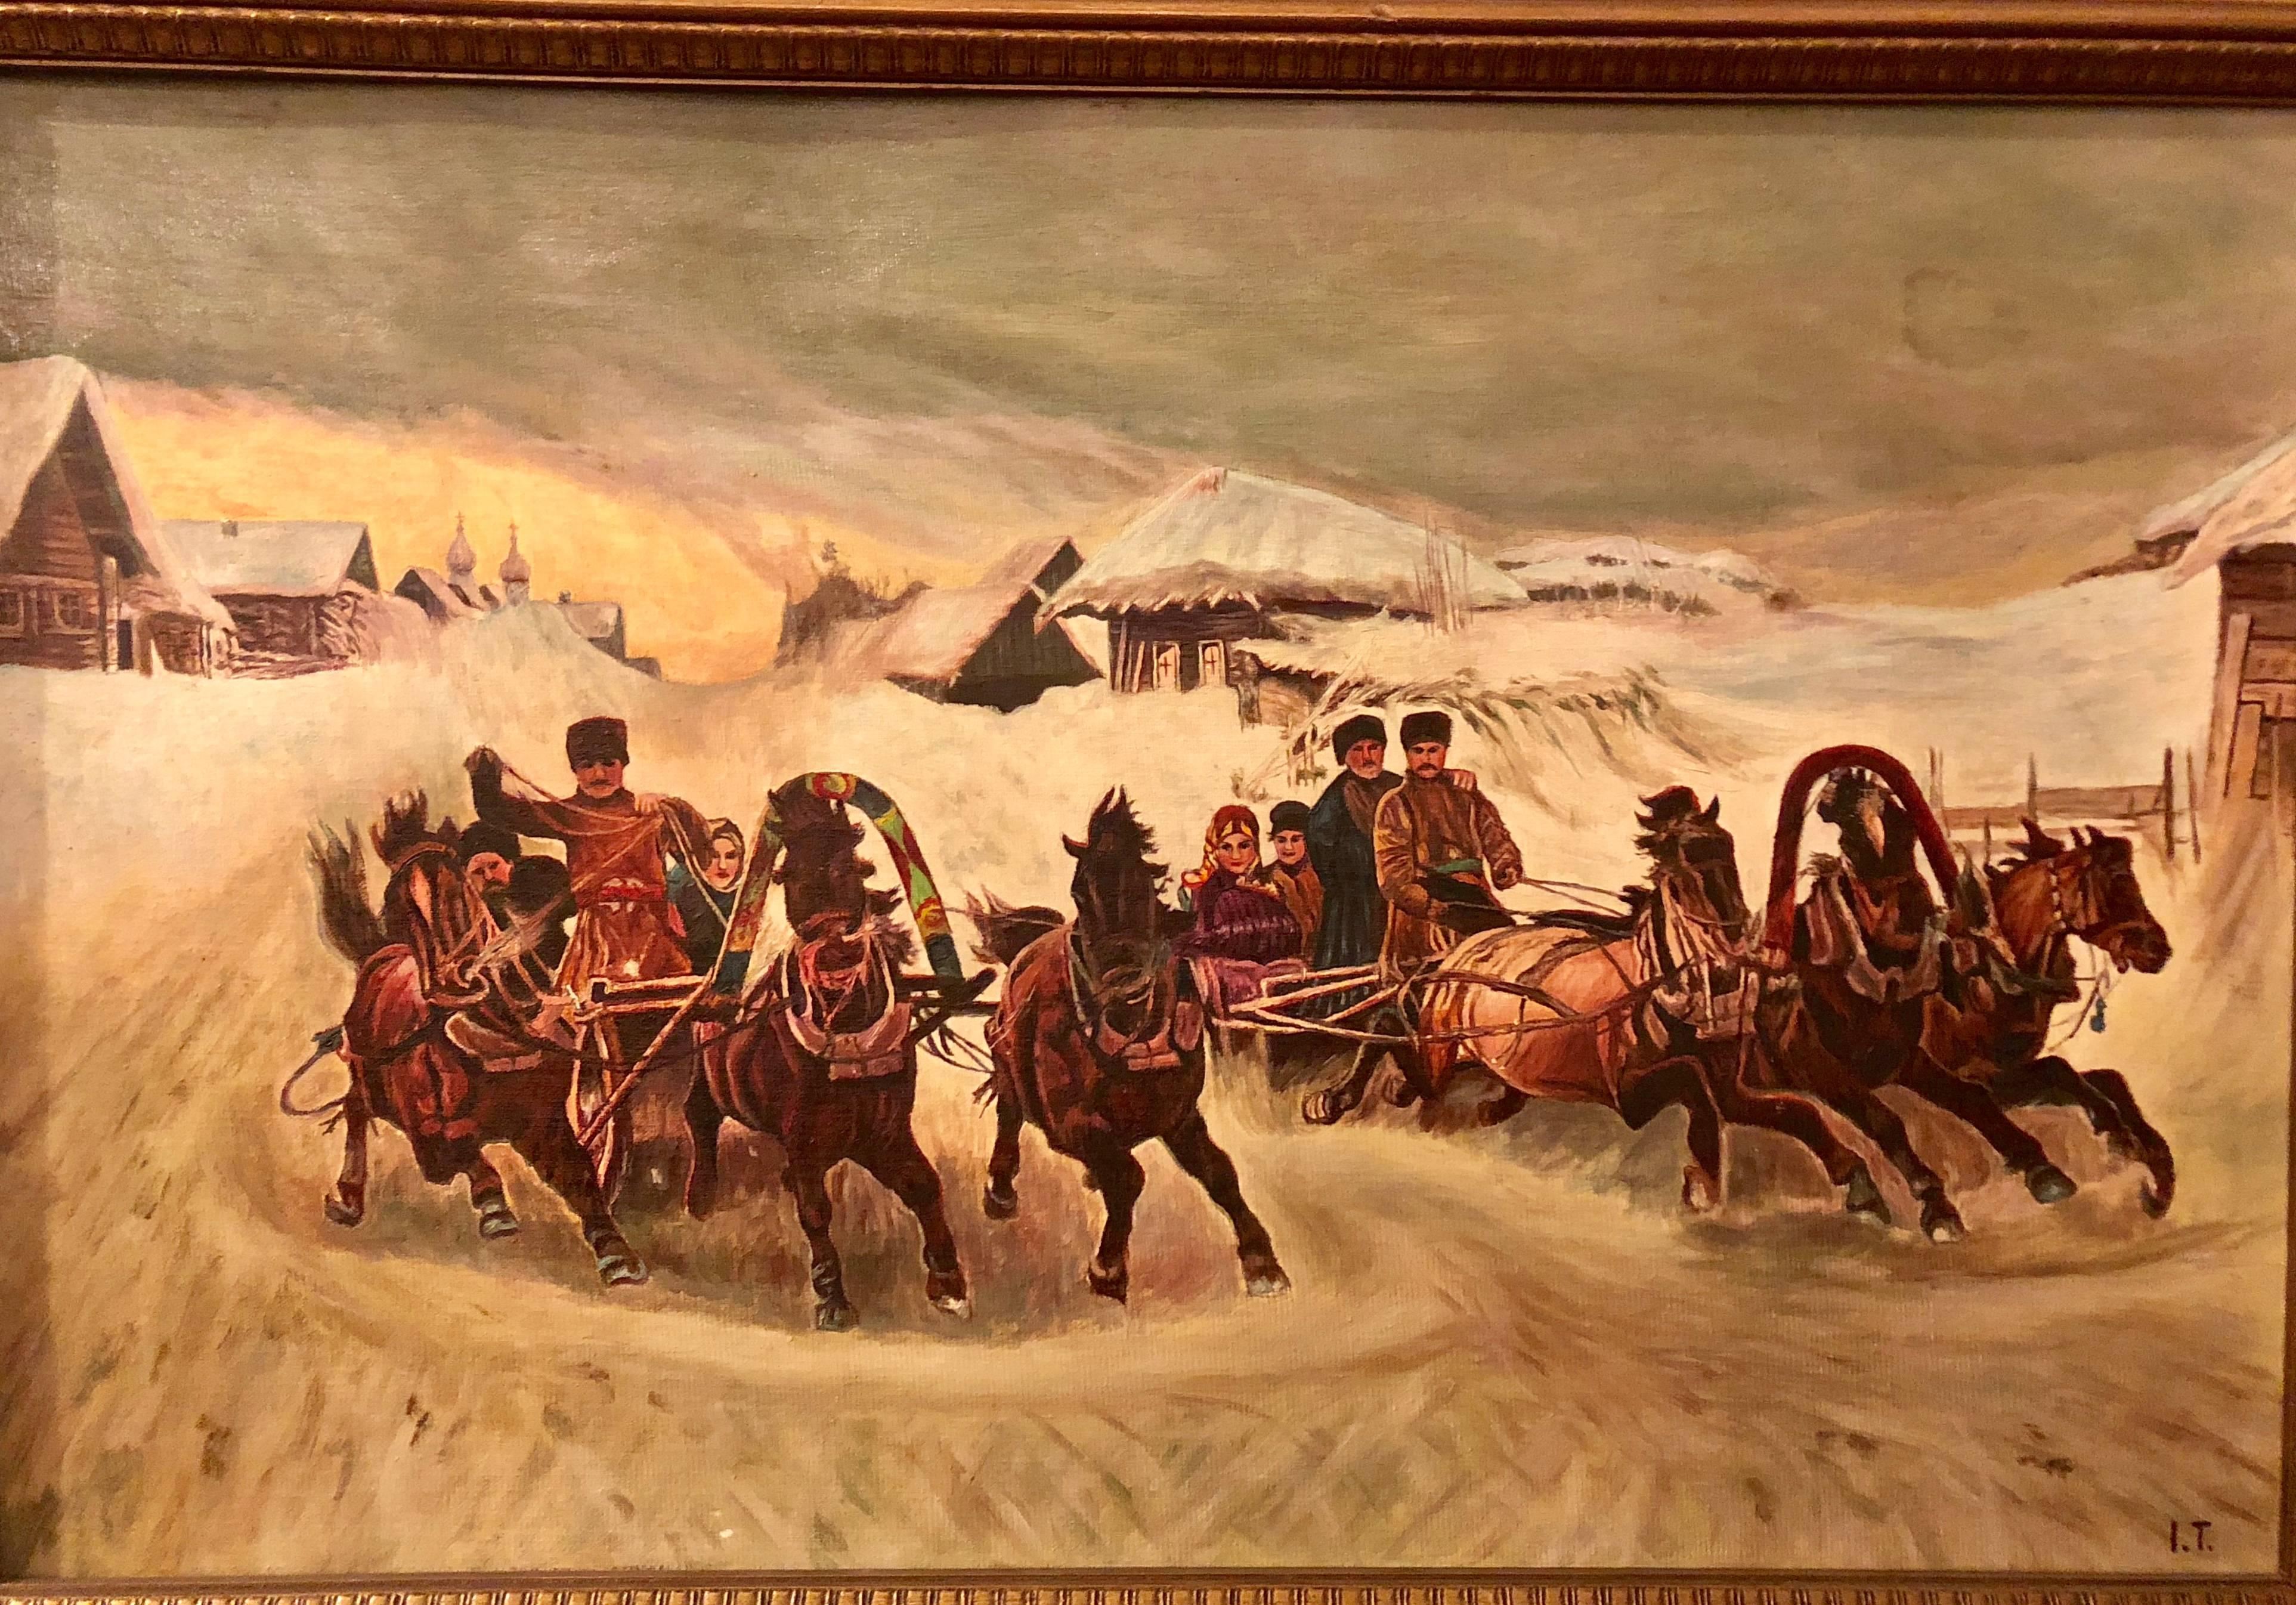 Oil on canvas of a Russian racing scene in the snow by Ivan Tschernikow. This Sleigh ride oil on canvas was the former property of Fashion icon Tommy Hilfiger. This work has been professionally framed.